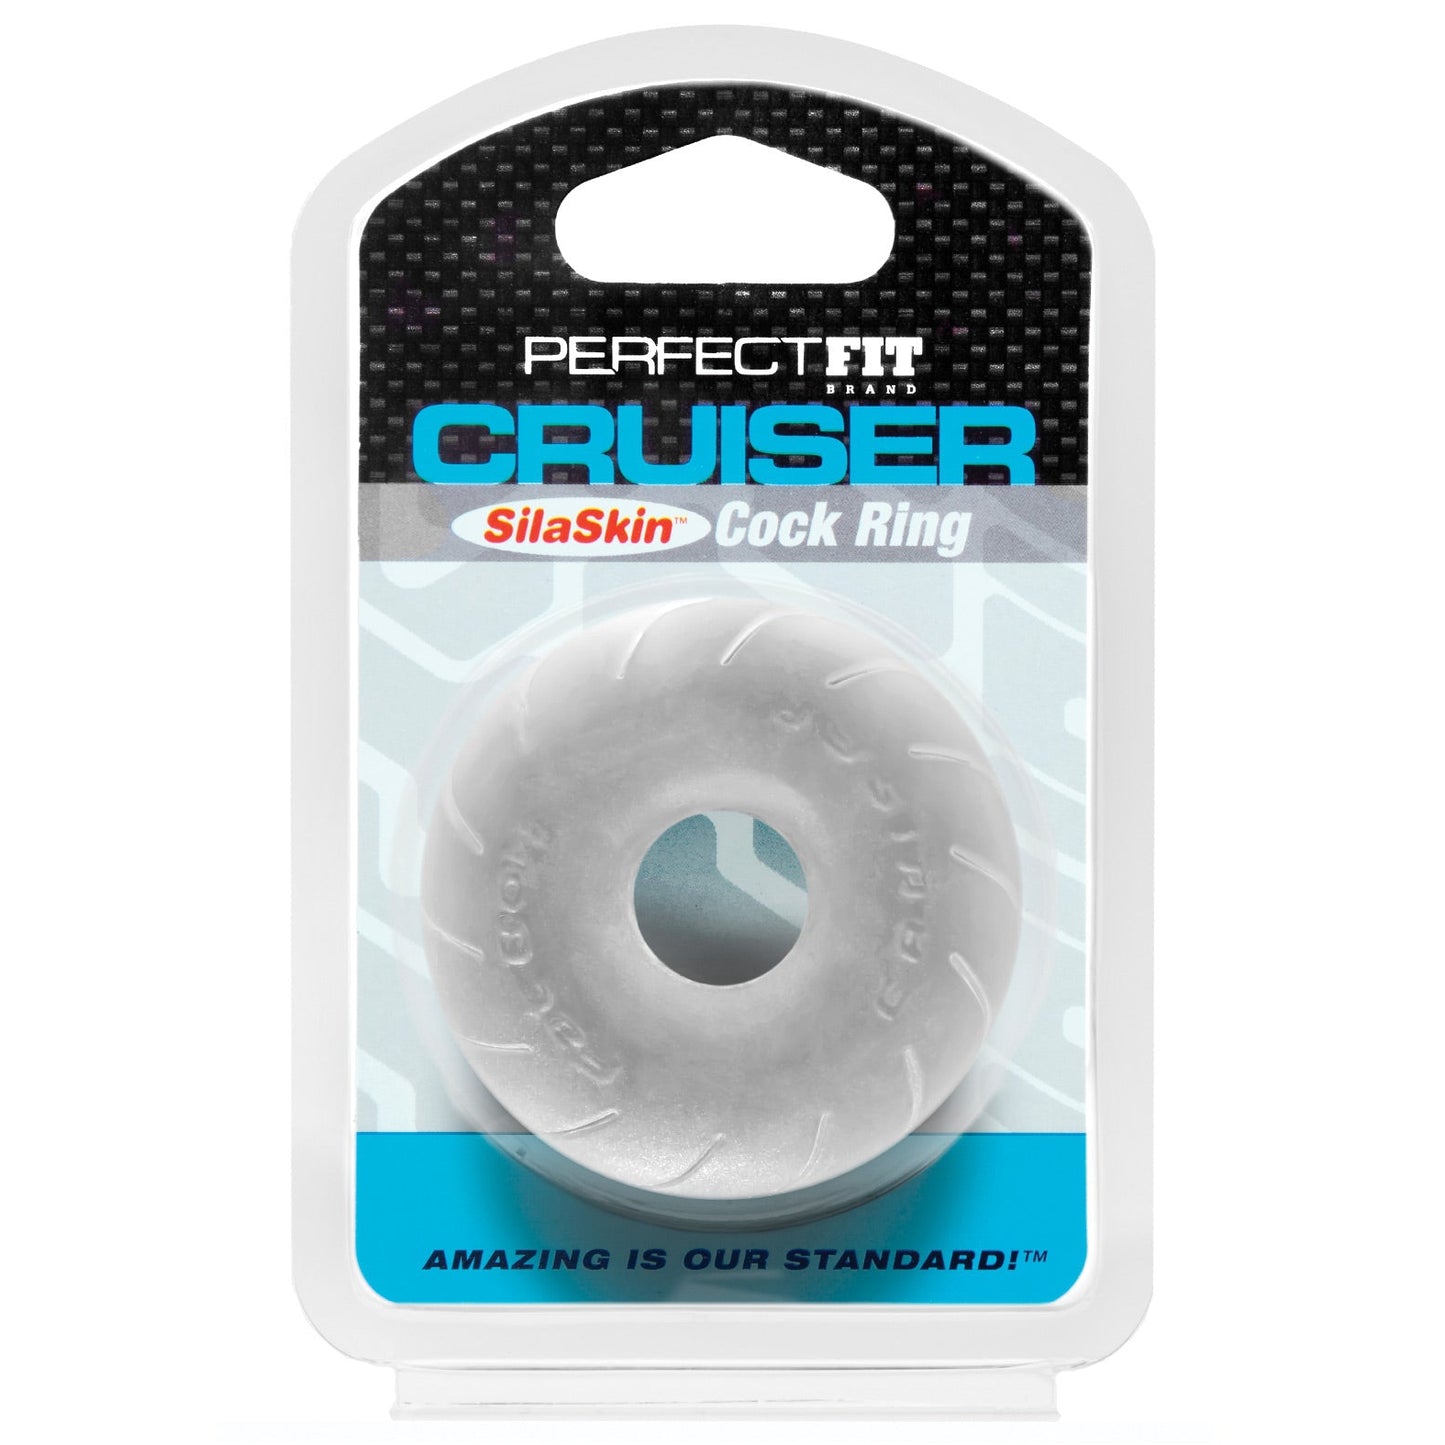 Perfect Fit Cruiser Cock Ring